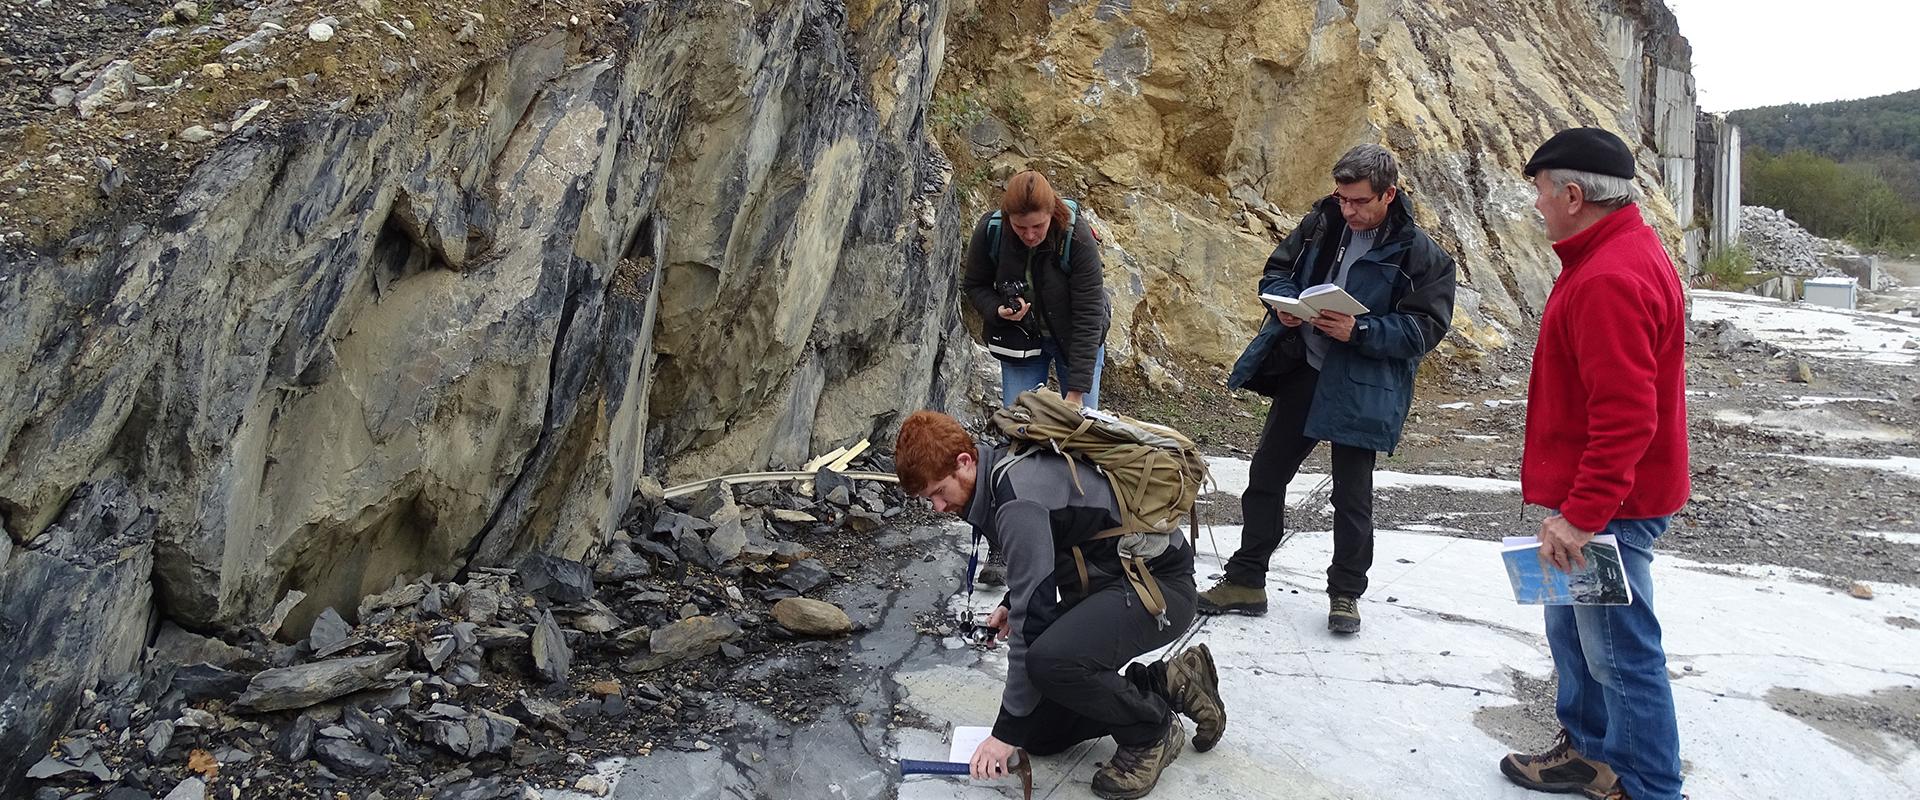 Geologists on a field assignment, Pyrenees